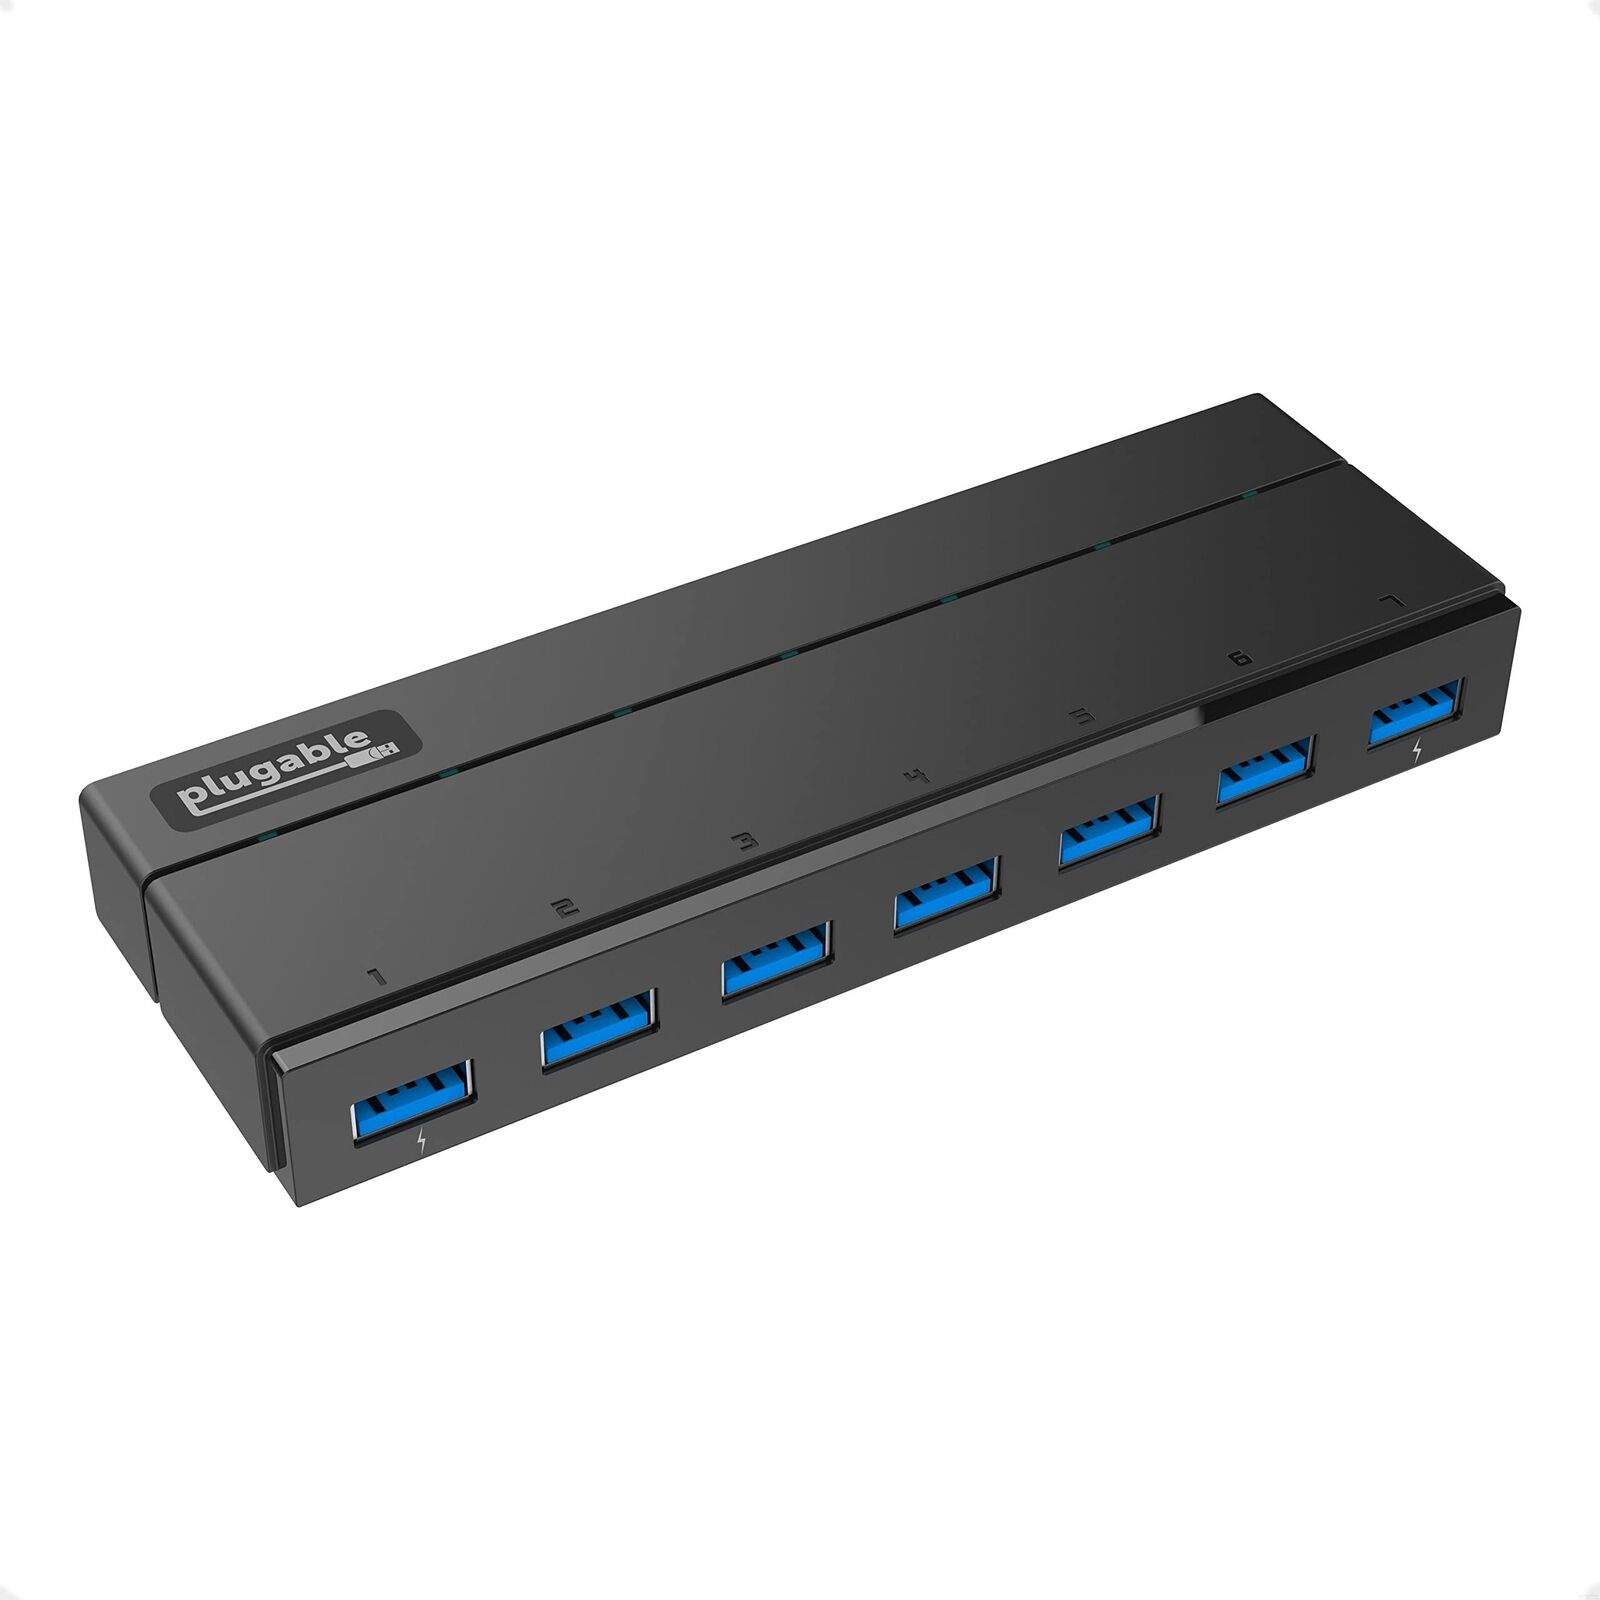 Plugable 7-Port USB 3.0 Hub with 36W Power Adapter - Driverless - Effortlessly C